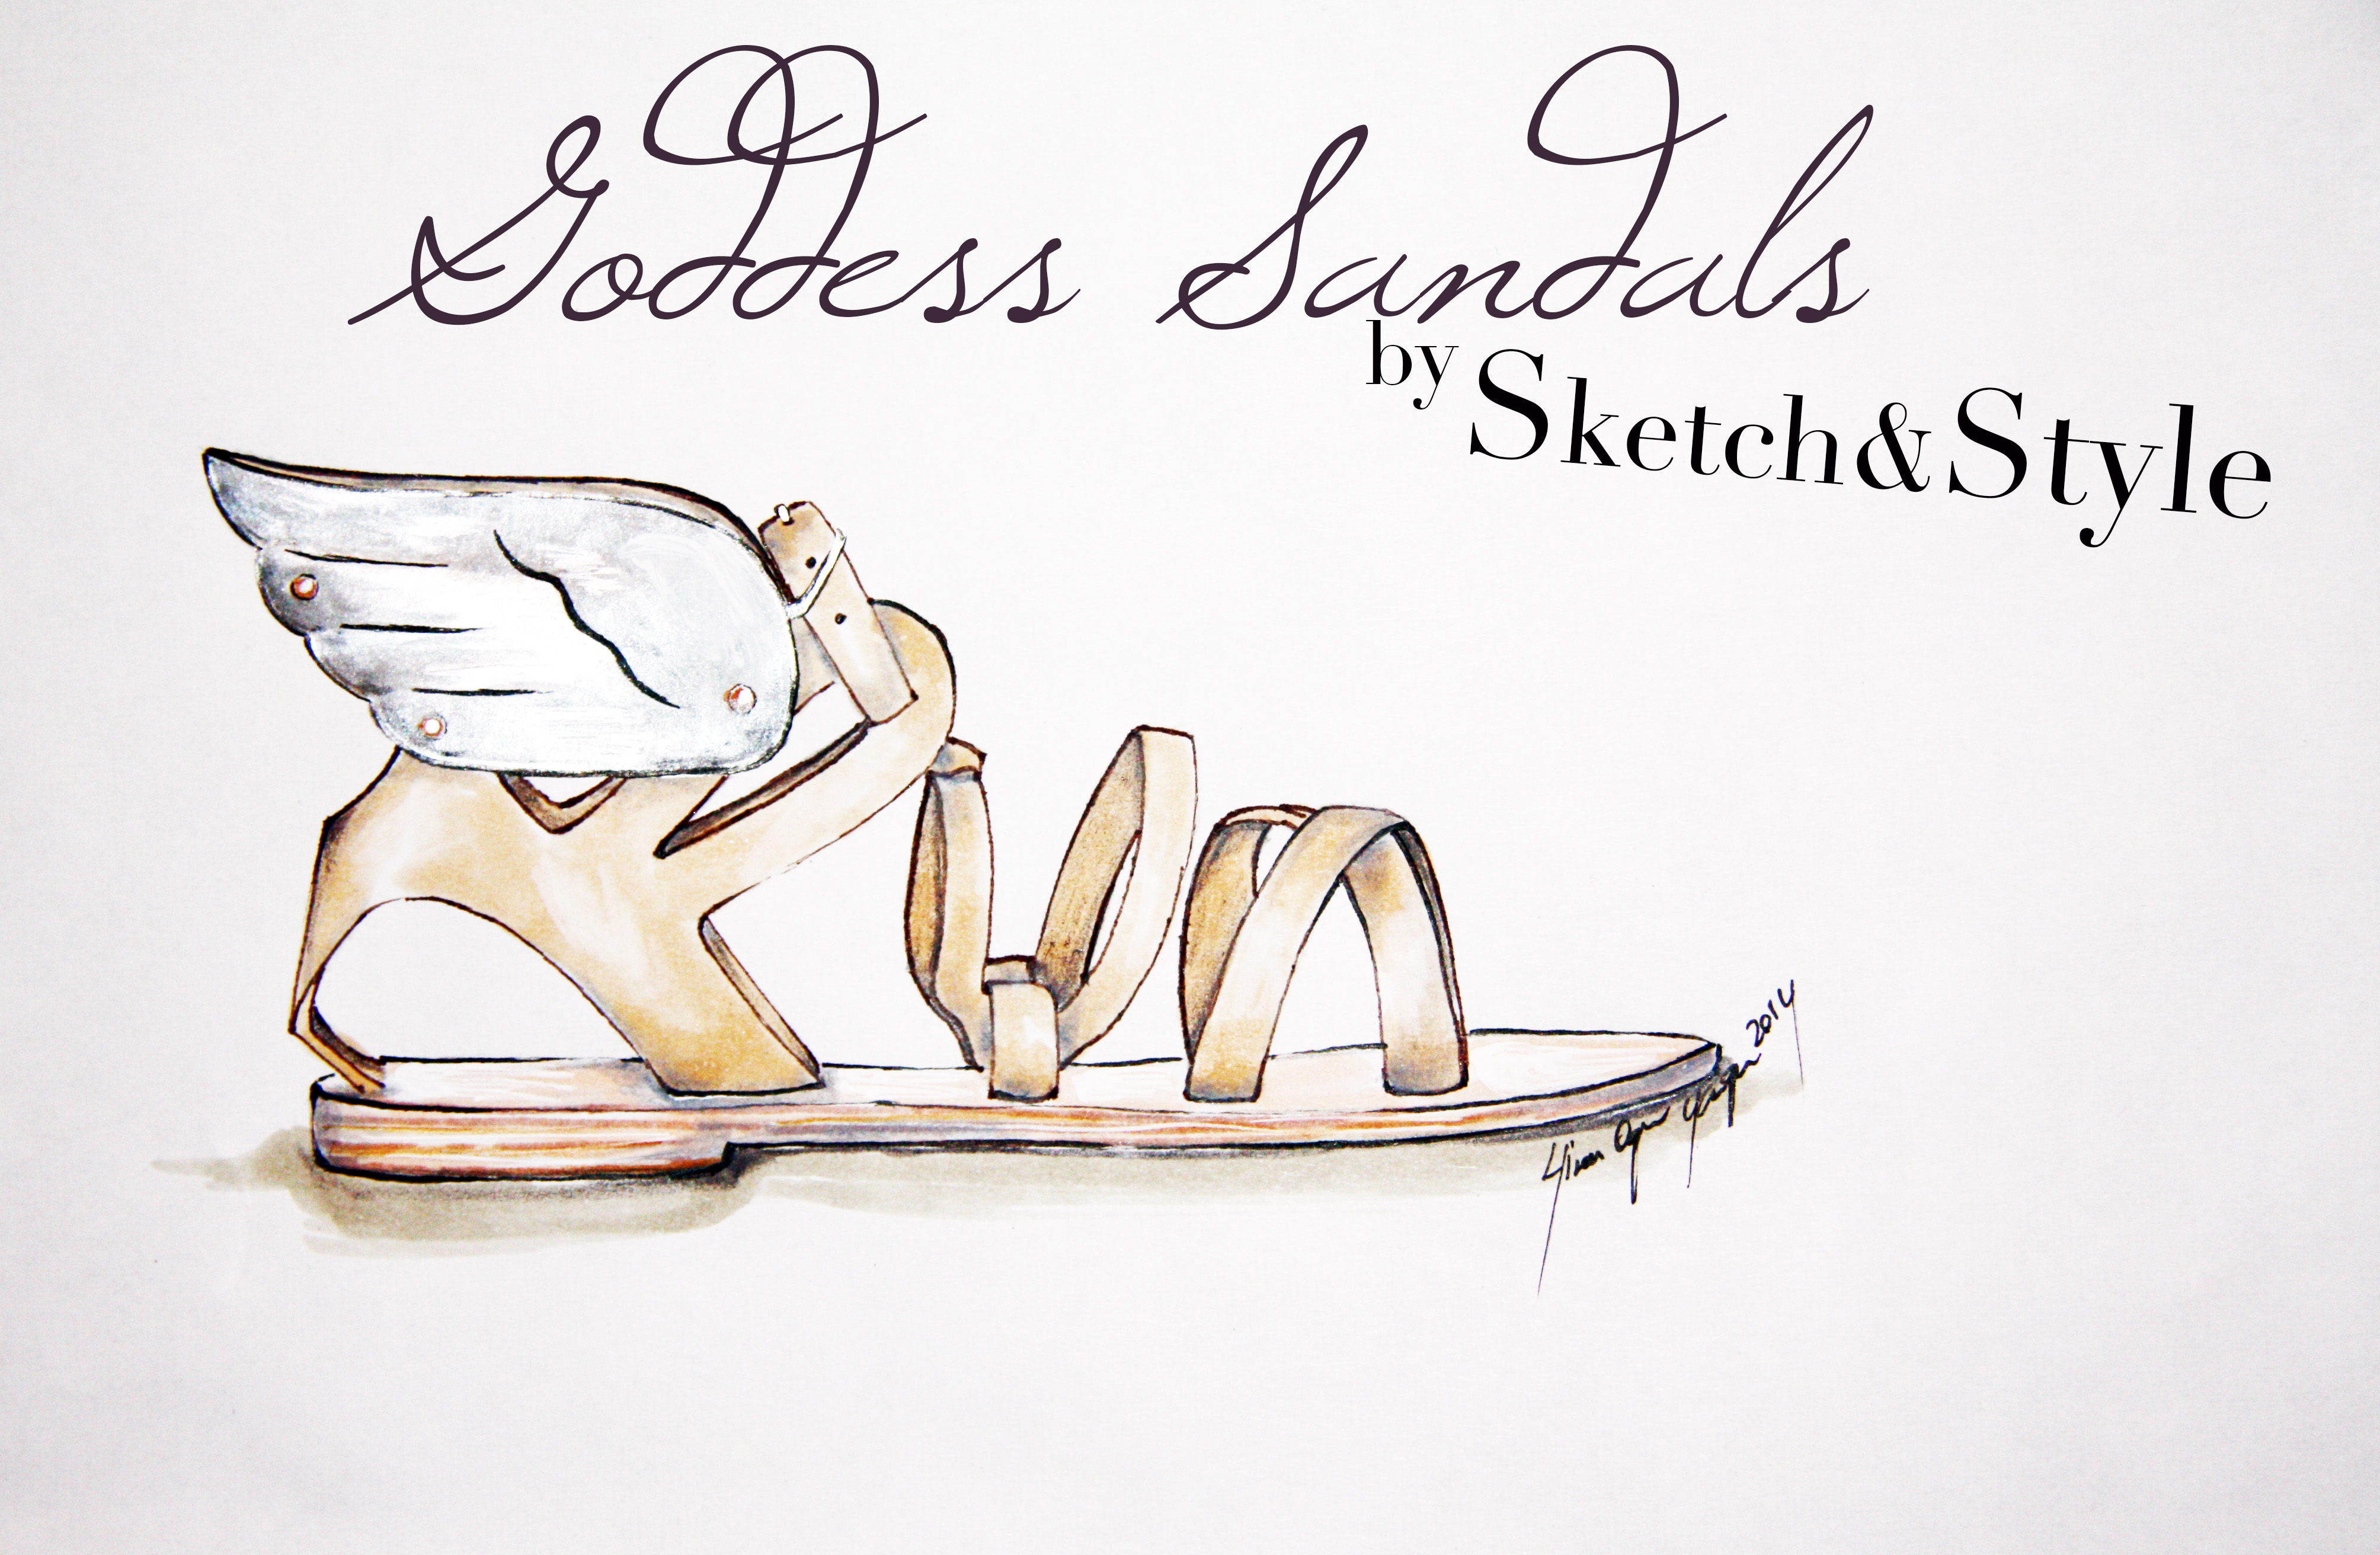 Ancient Sandals| Sketch&Style